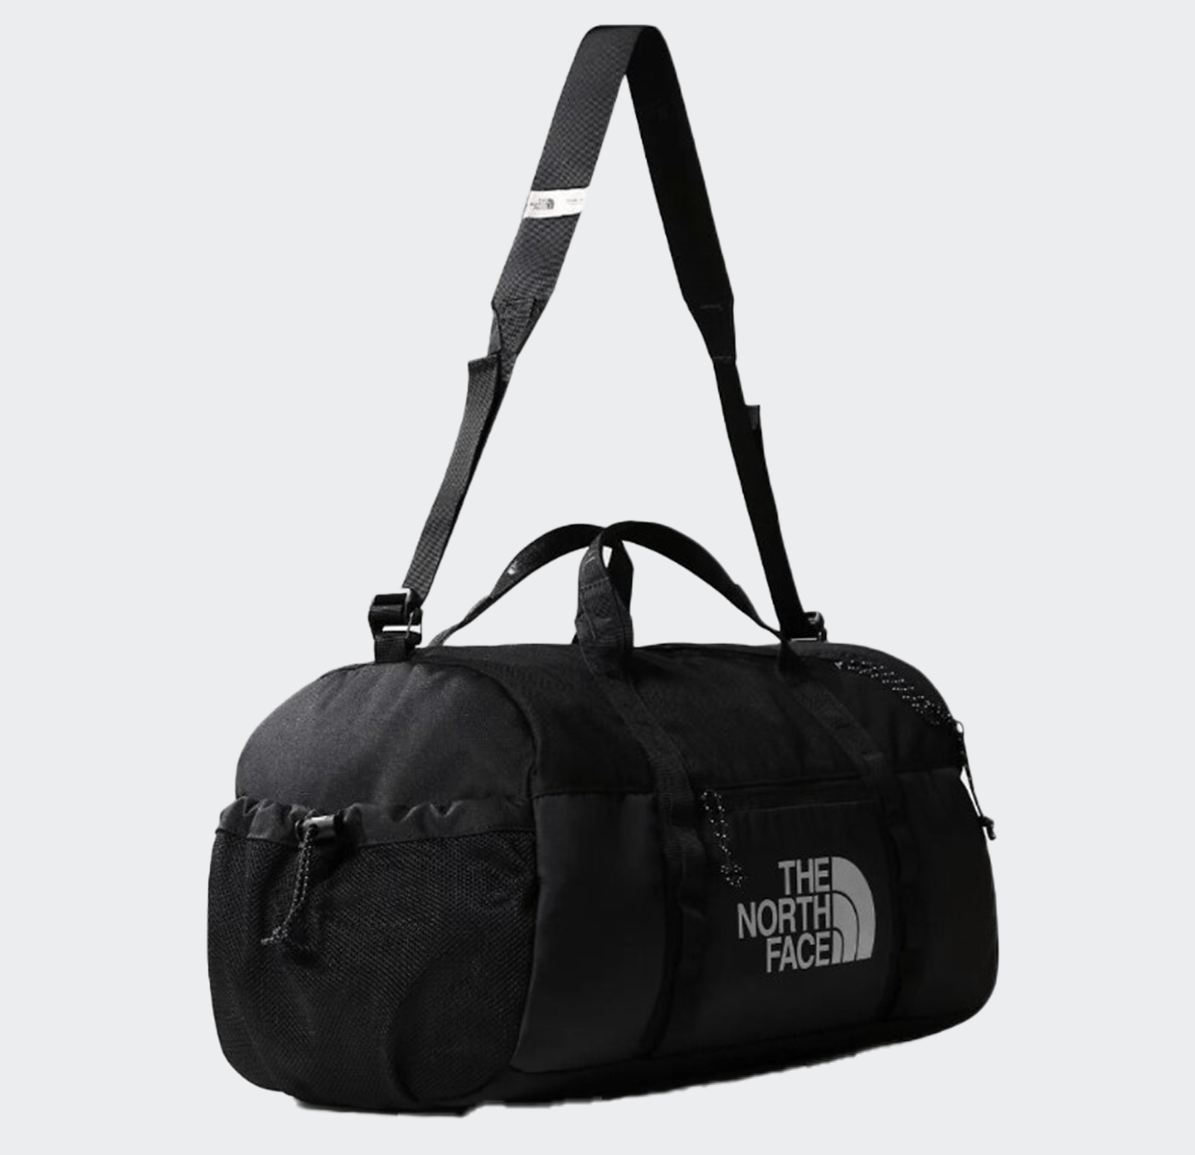 The North Face Bozer Duffel - TNF Black/TNF White - The North Face - State Of Play